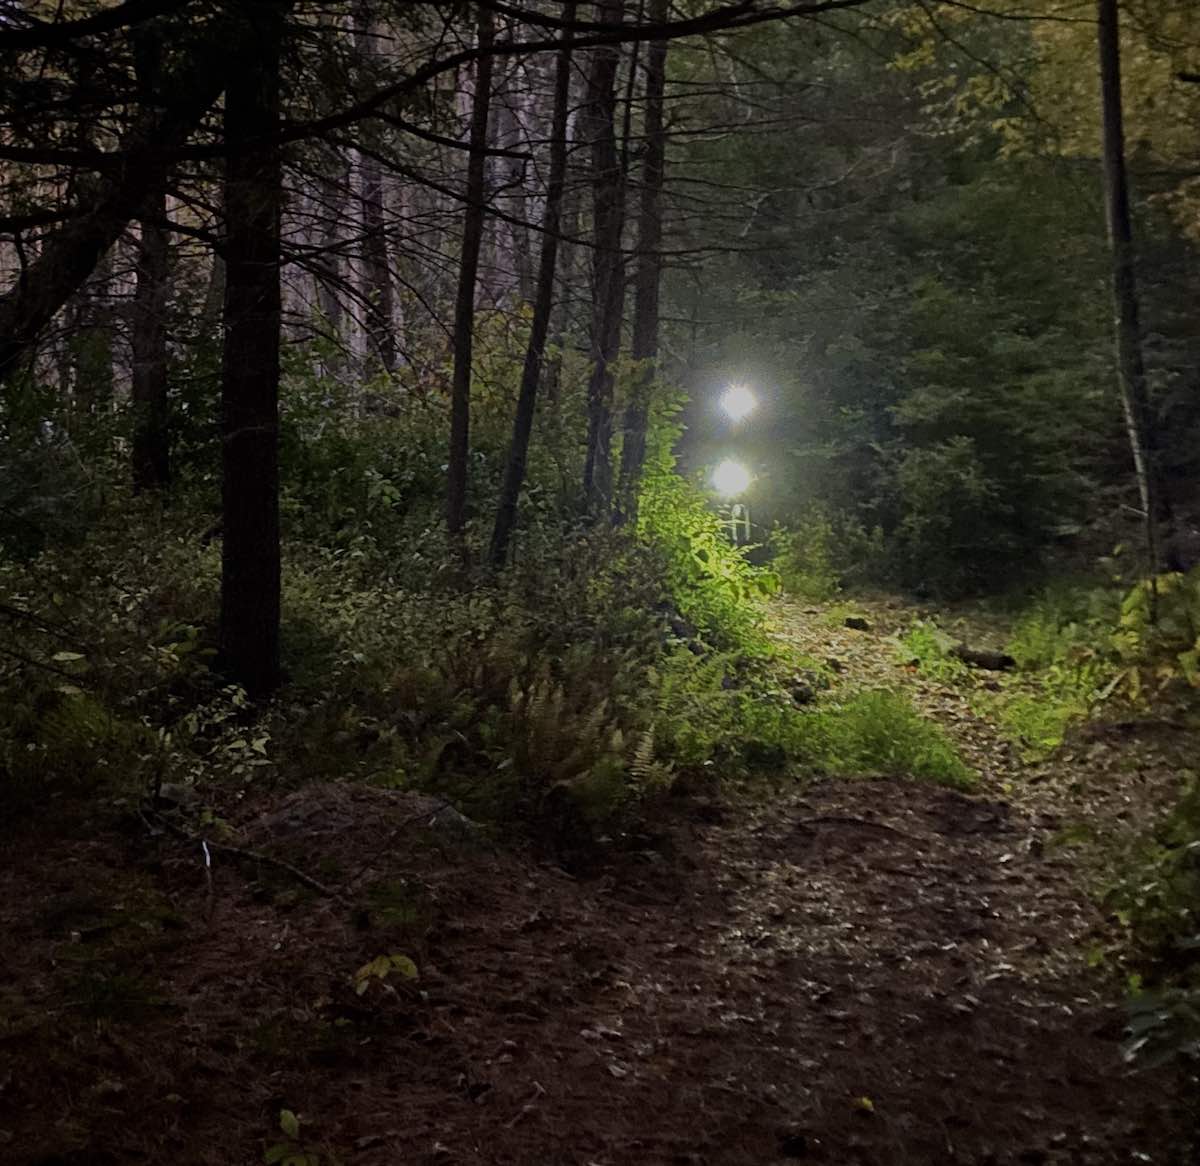 bikerumor pic of the day Boxford State Forest, Massachusetts, a cyclist appears on a trail in the forest with only bike lights showing as dusk settles in.